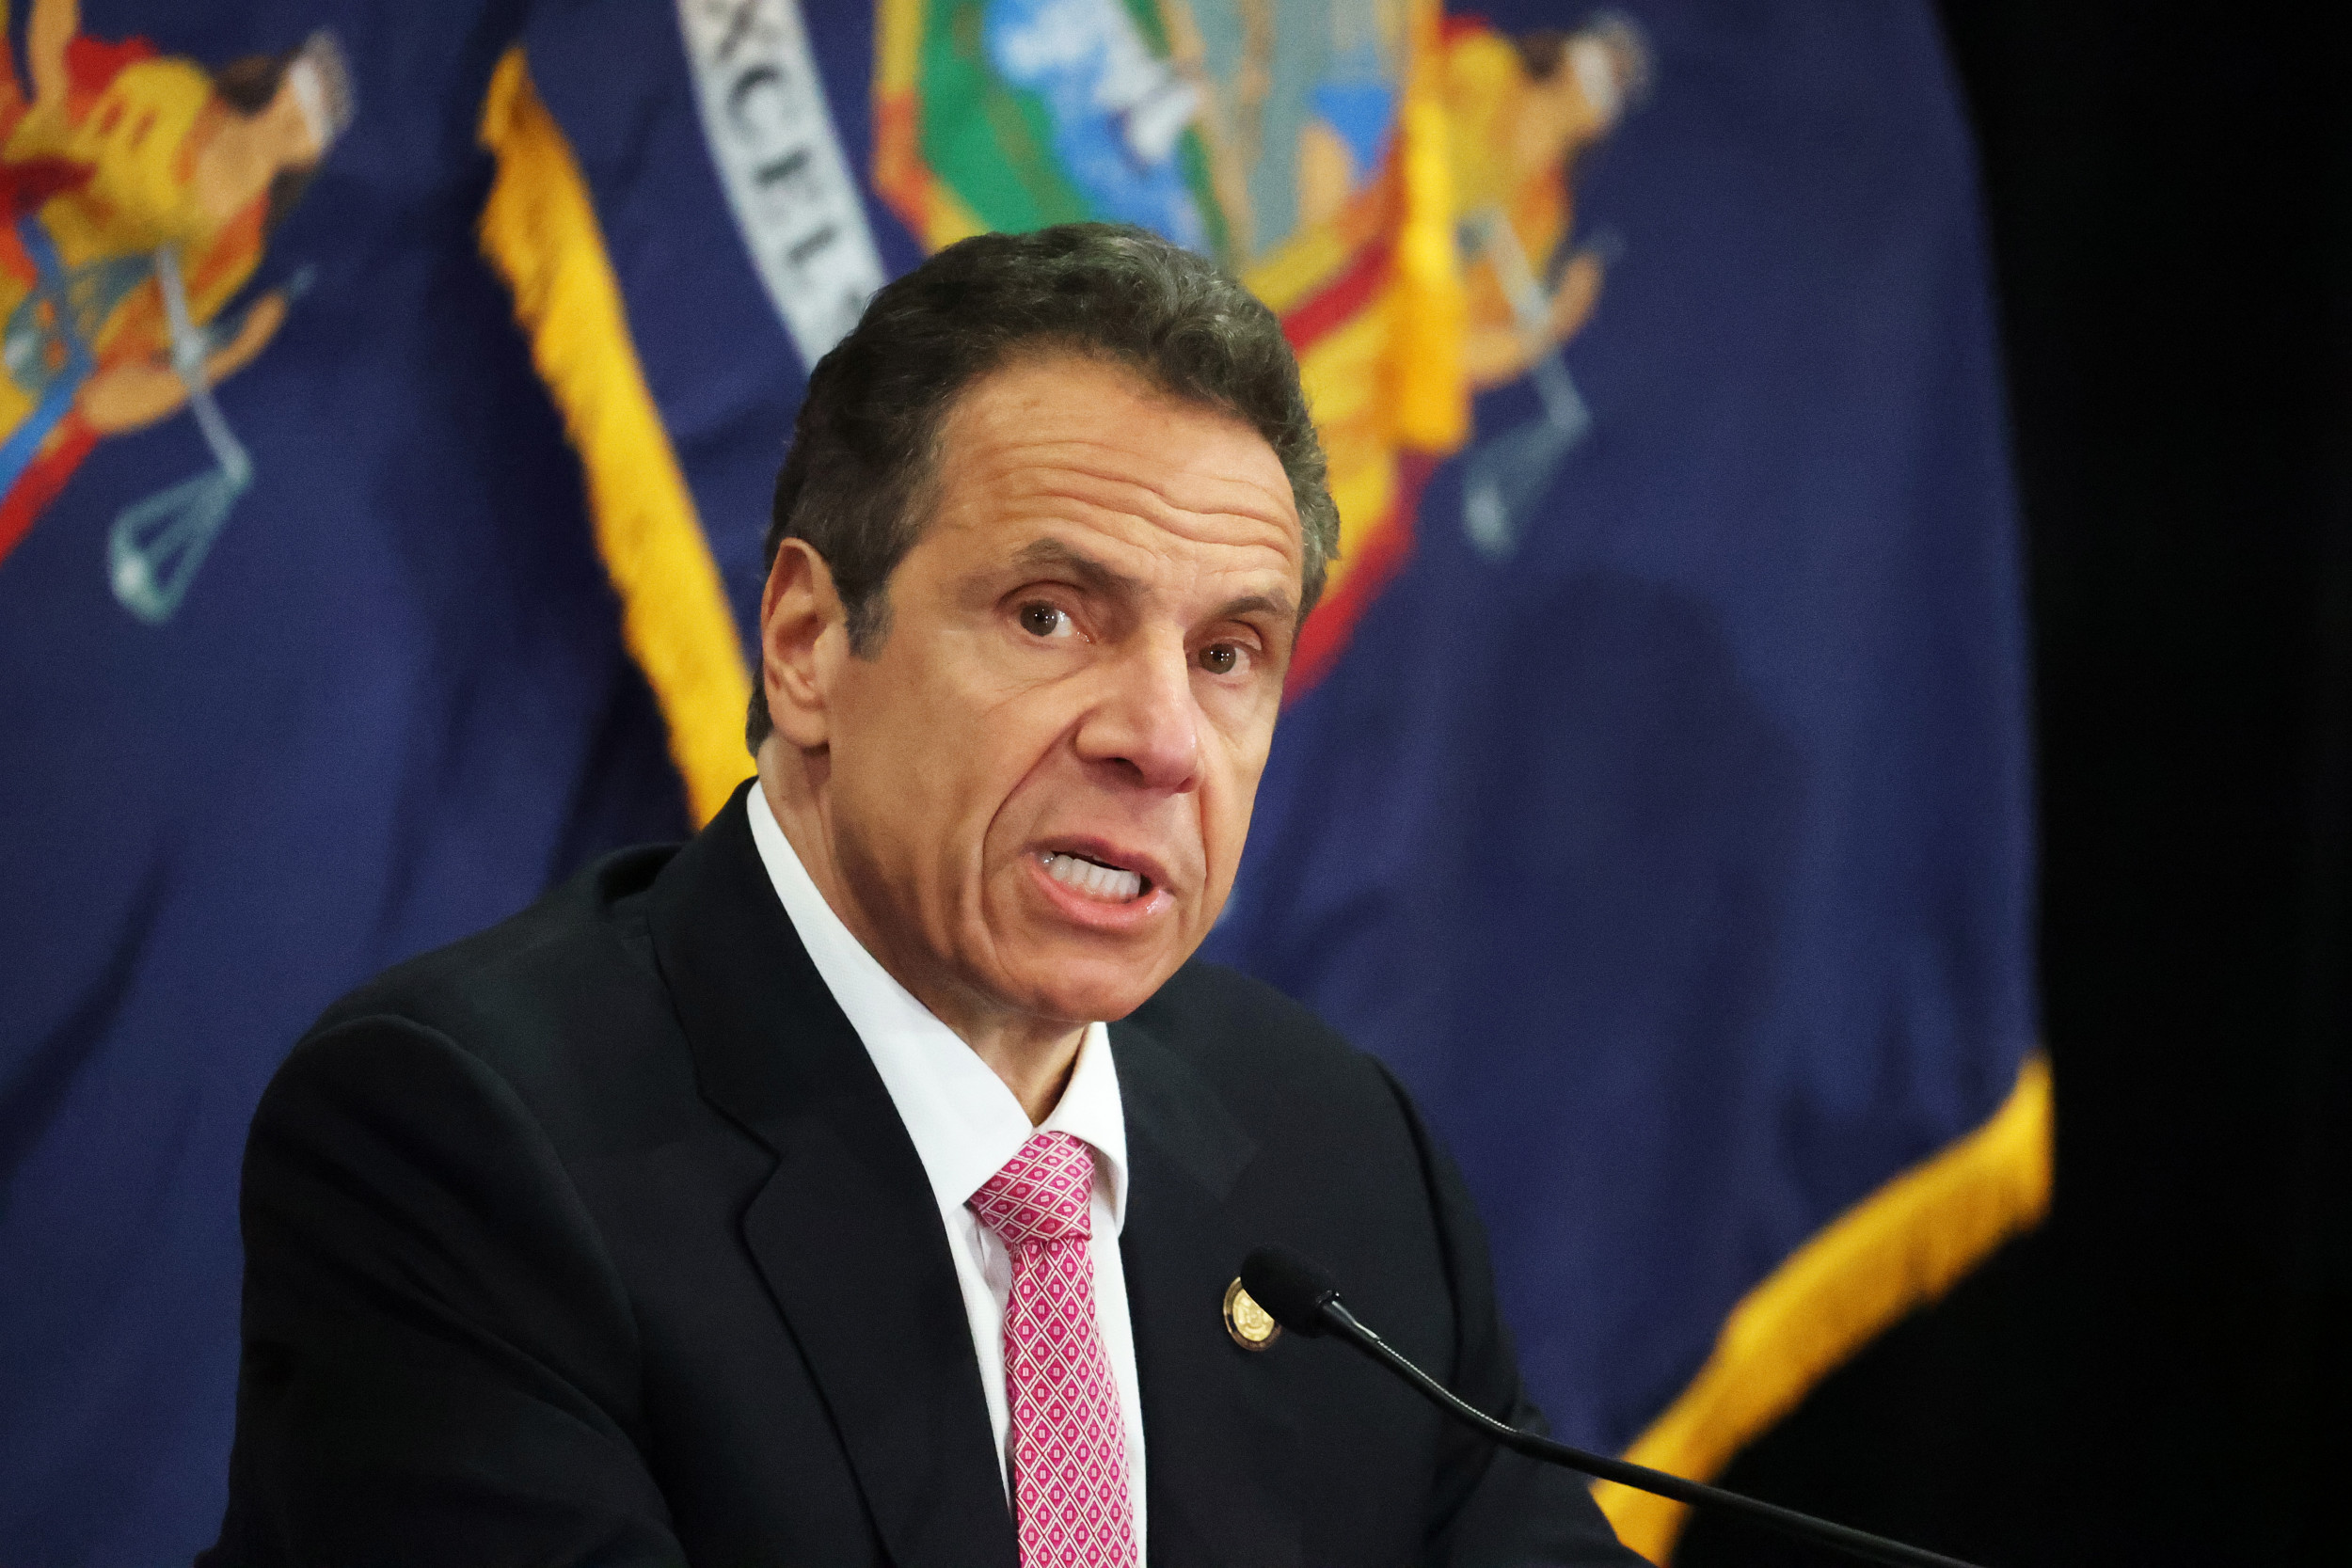 Andrew Cuomo Needs to Own Nursing Home COVID Deaths | Opinion